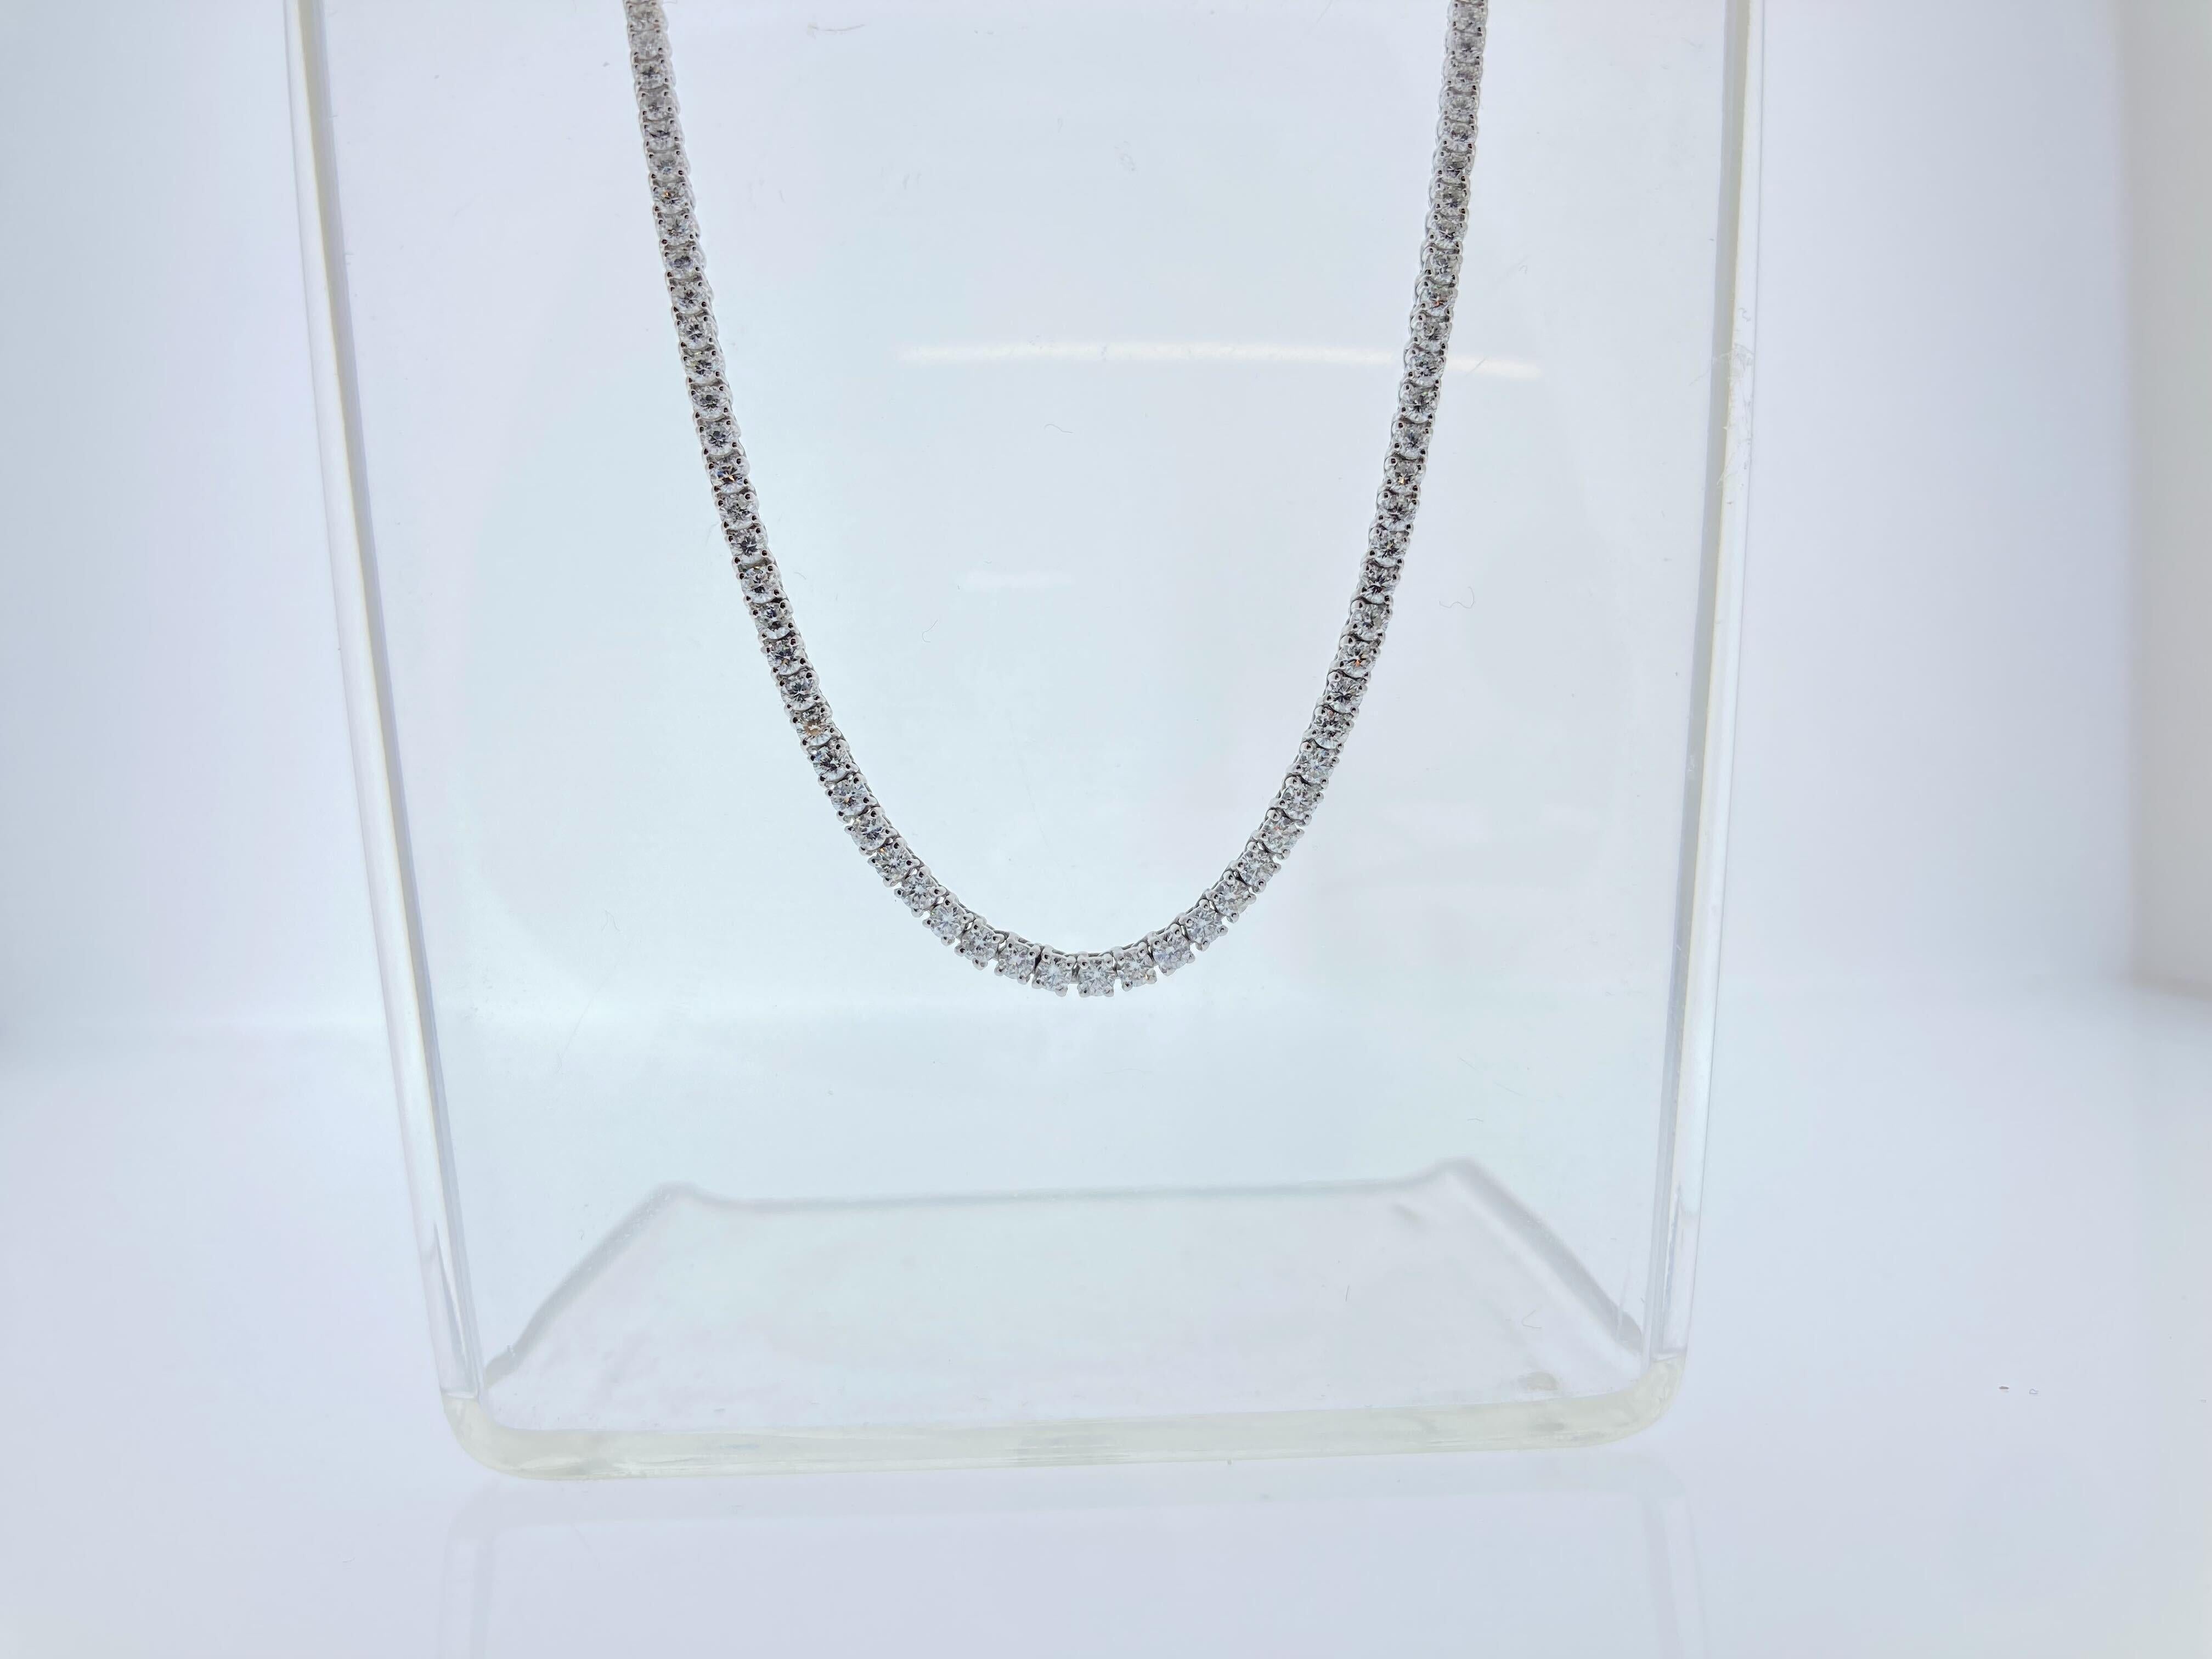 Contemporary 10.00 Carat Round Diamond Tennis Necklaces In 14k White Gold For Sale